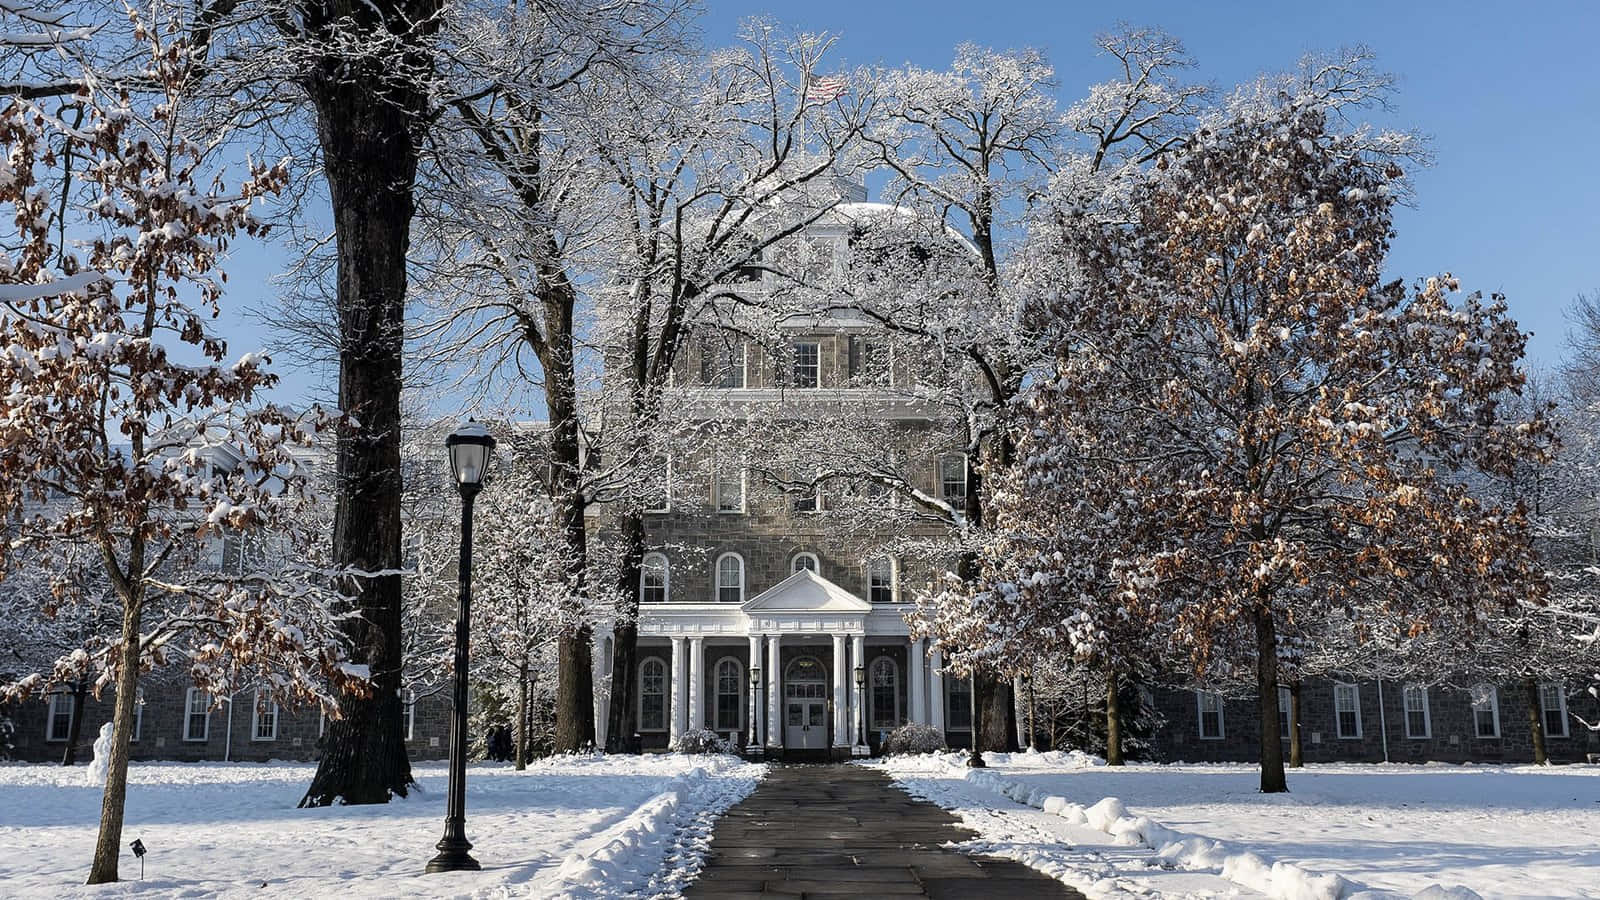 A Large Building With Snow Covered Trees